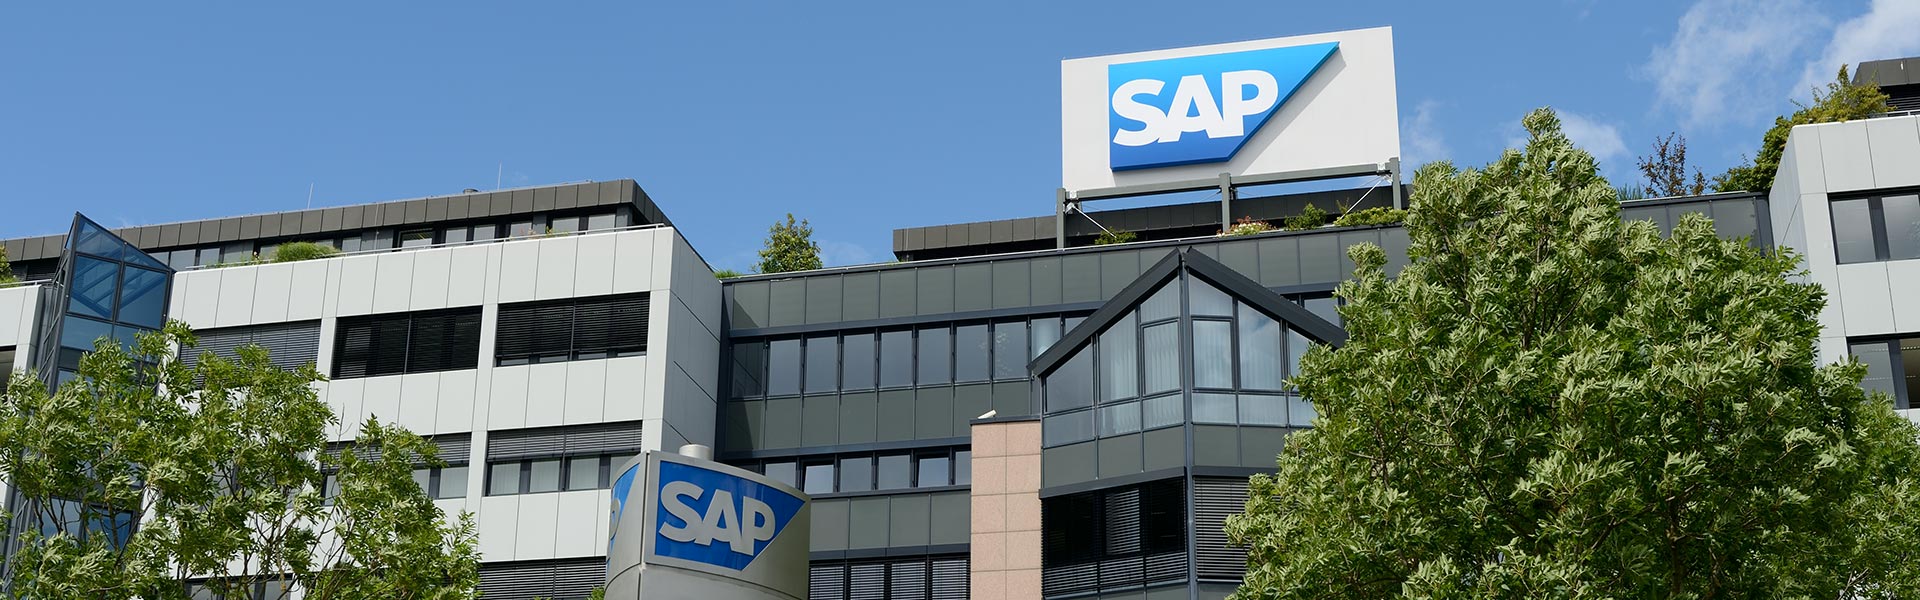 SAP Accelerates More Than 1,000 Startups Globally, Introduces “Powered by SAP HANA” Certification Initiative